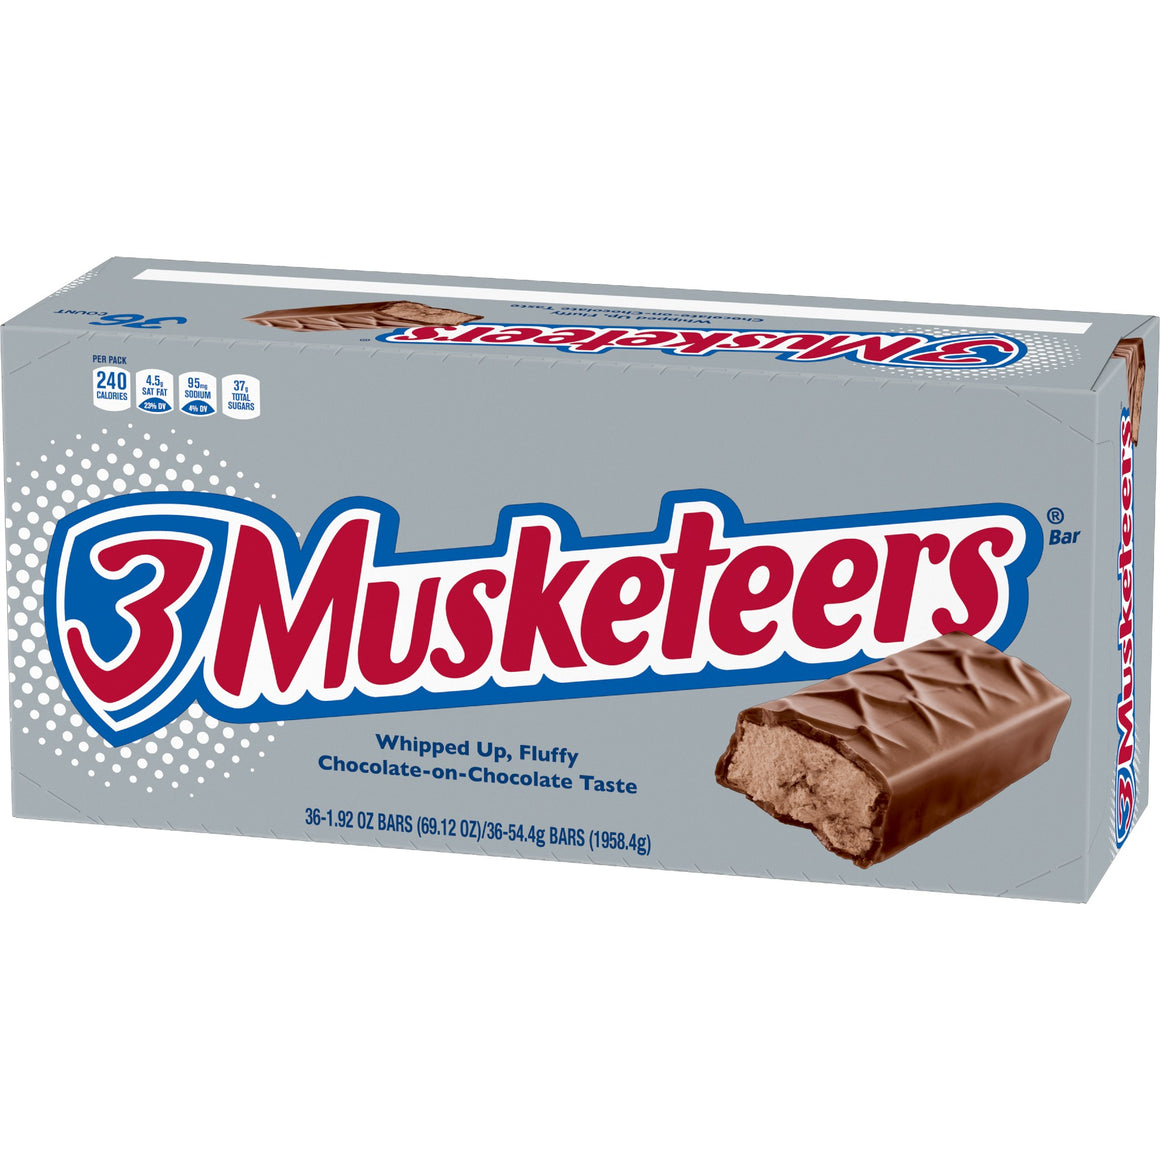 All City Candy 3 Musketeers Candy Bar 1.92 oz. Candy Bars Mars Chocolate 1 Bar For fresh candy and great service, visit www.allcitycandy.com